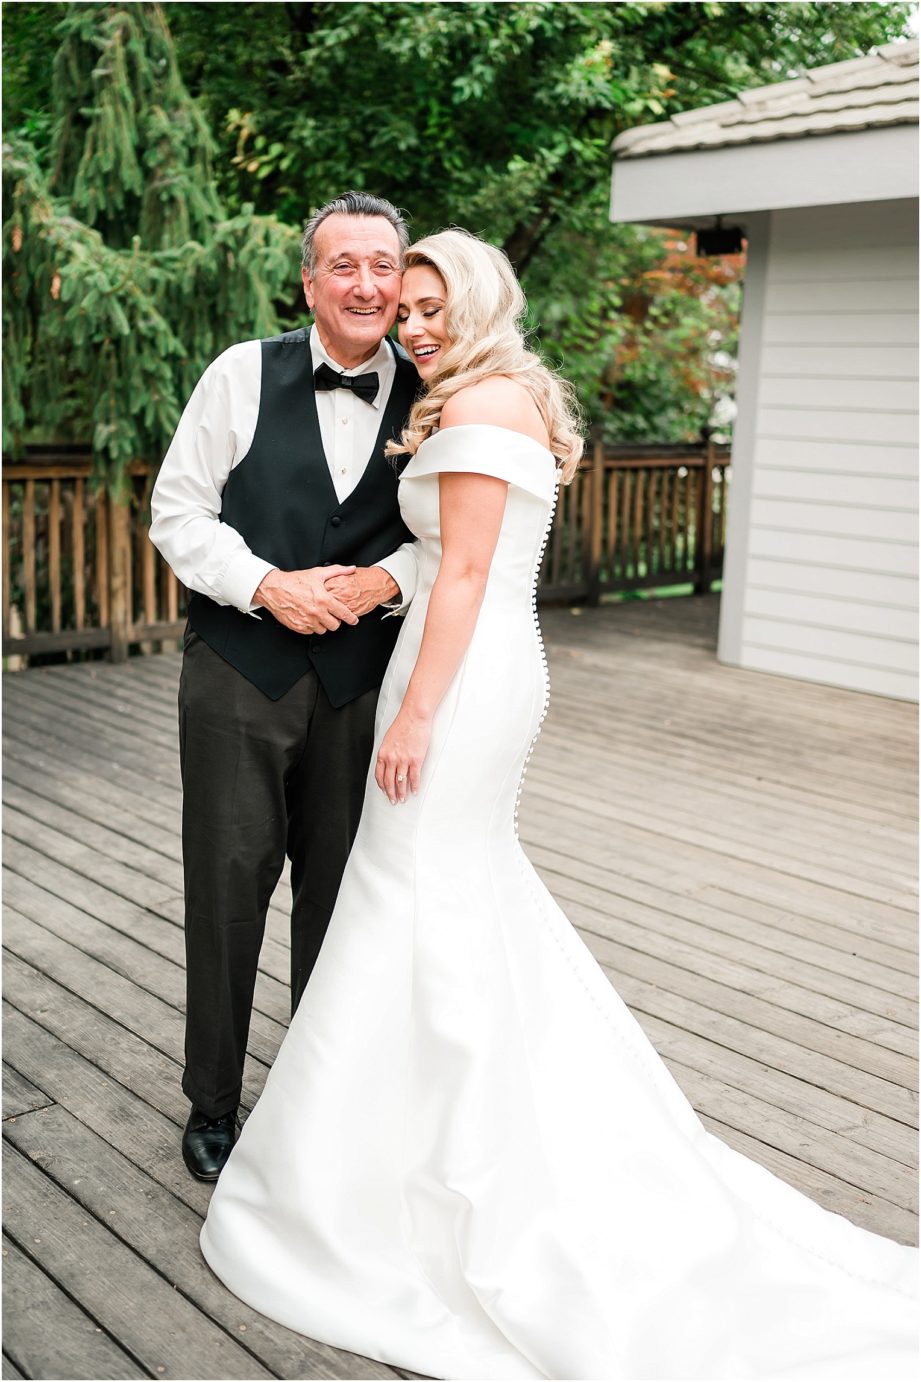 Terra Blanca Winery Wedding Tricities Photographer bride's father first look